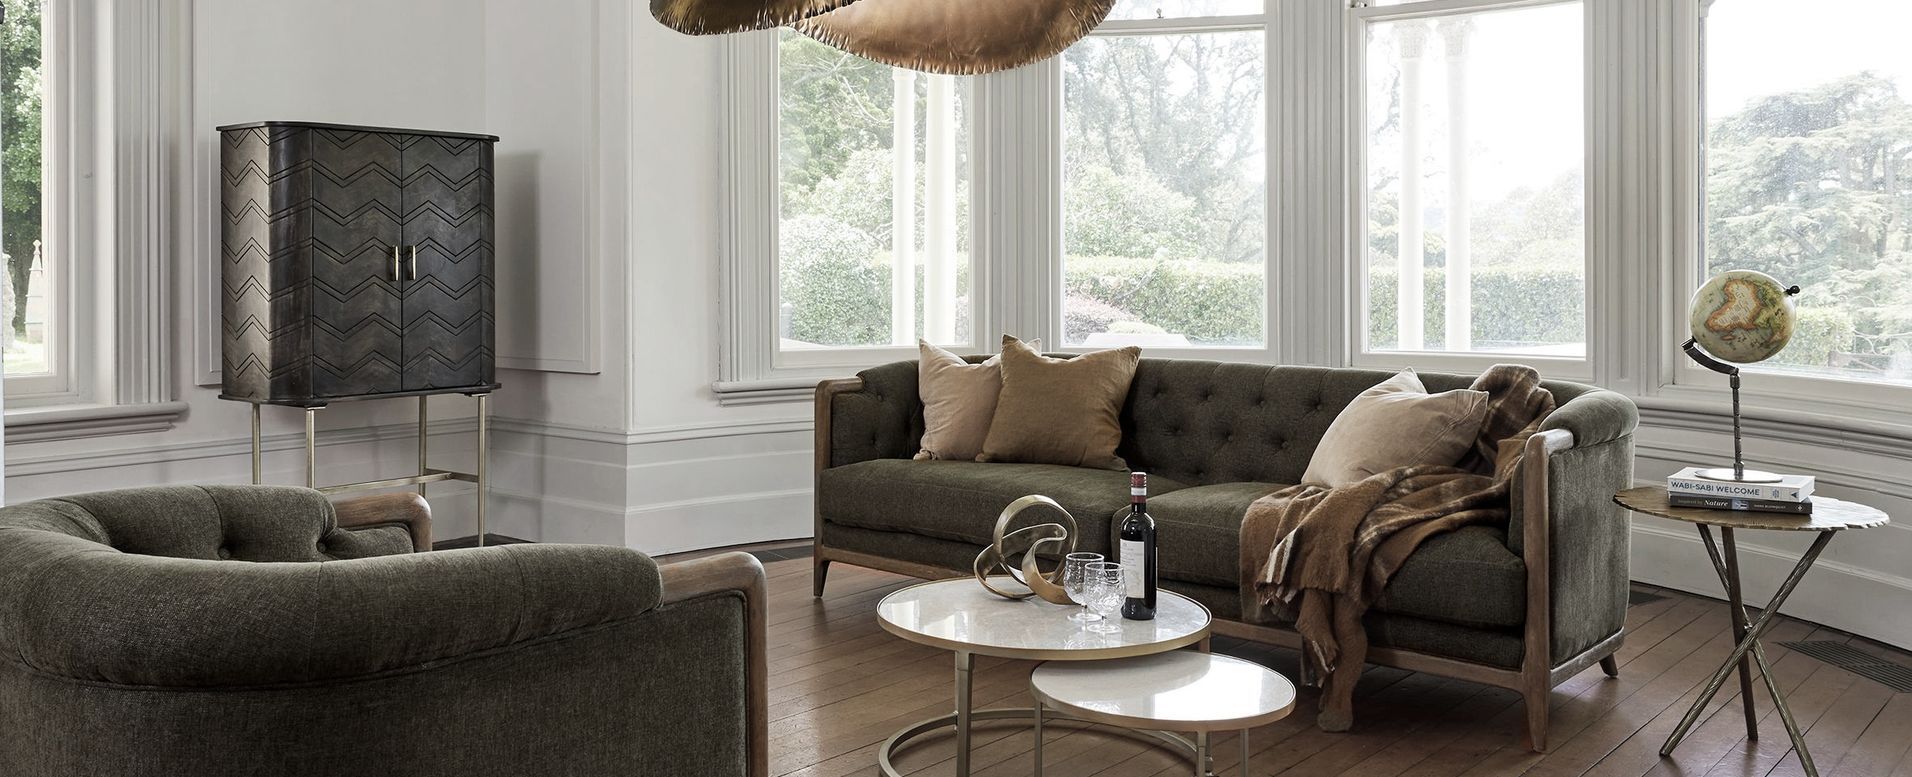 Notting Hill Interiors Banner image